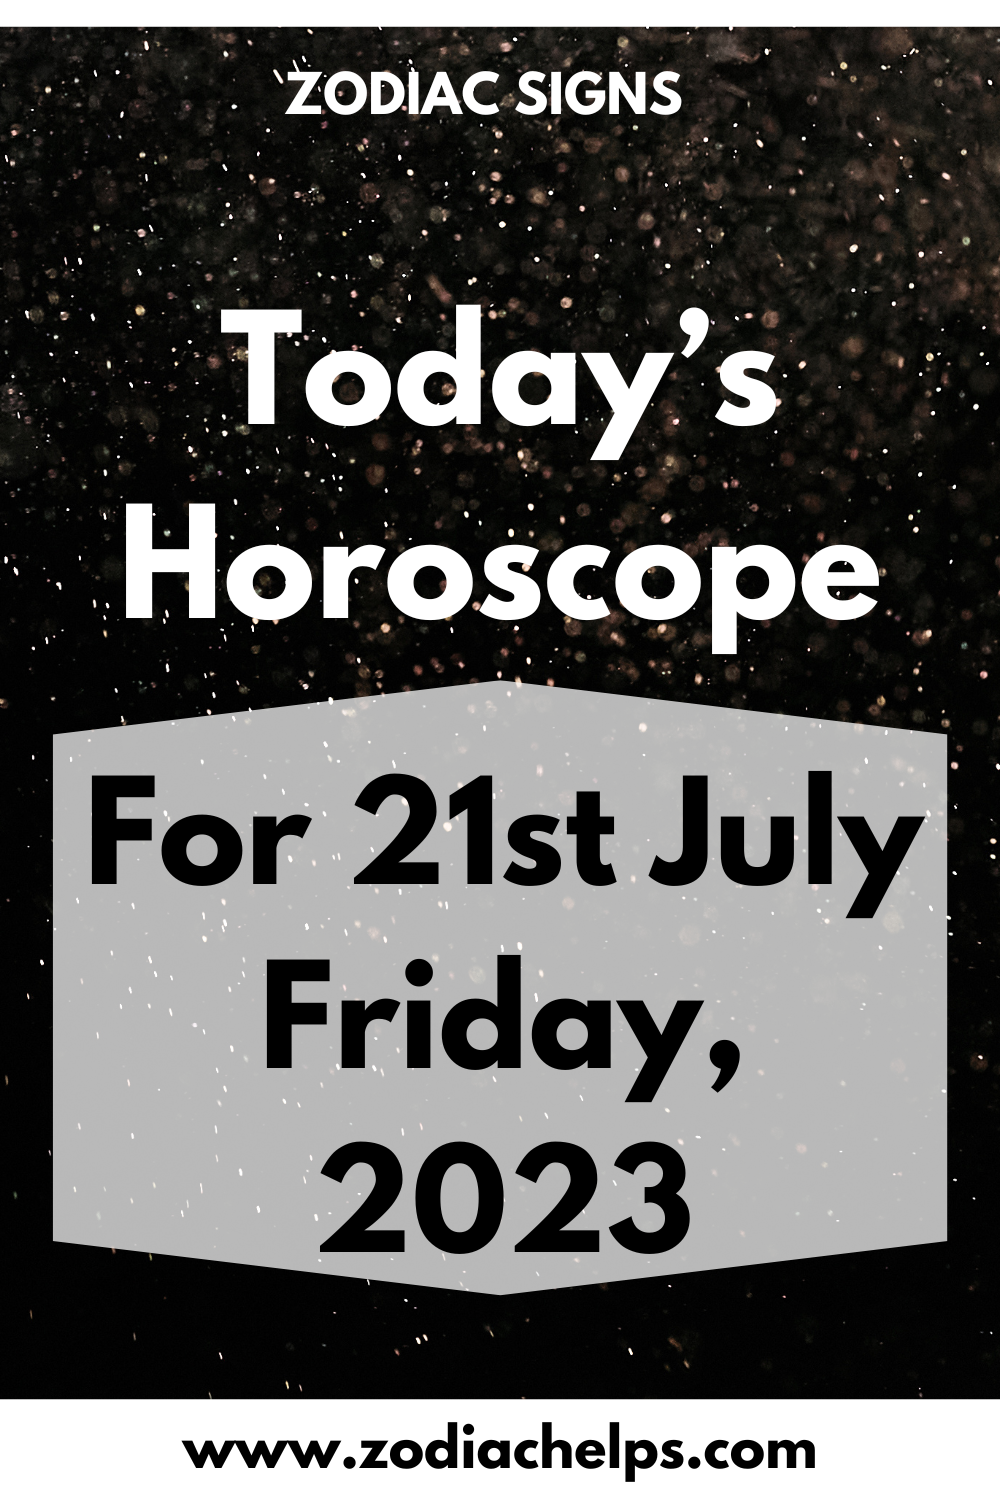 Today’s Horoscope for 21st July Friday, 2023